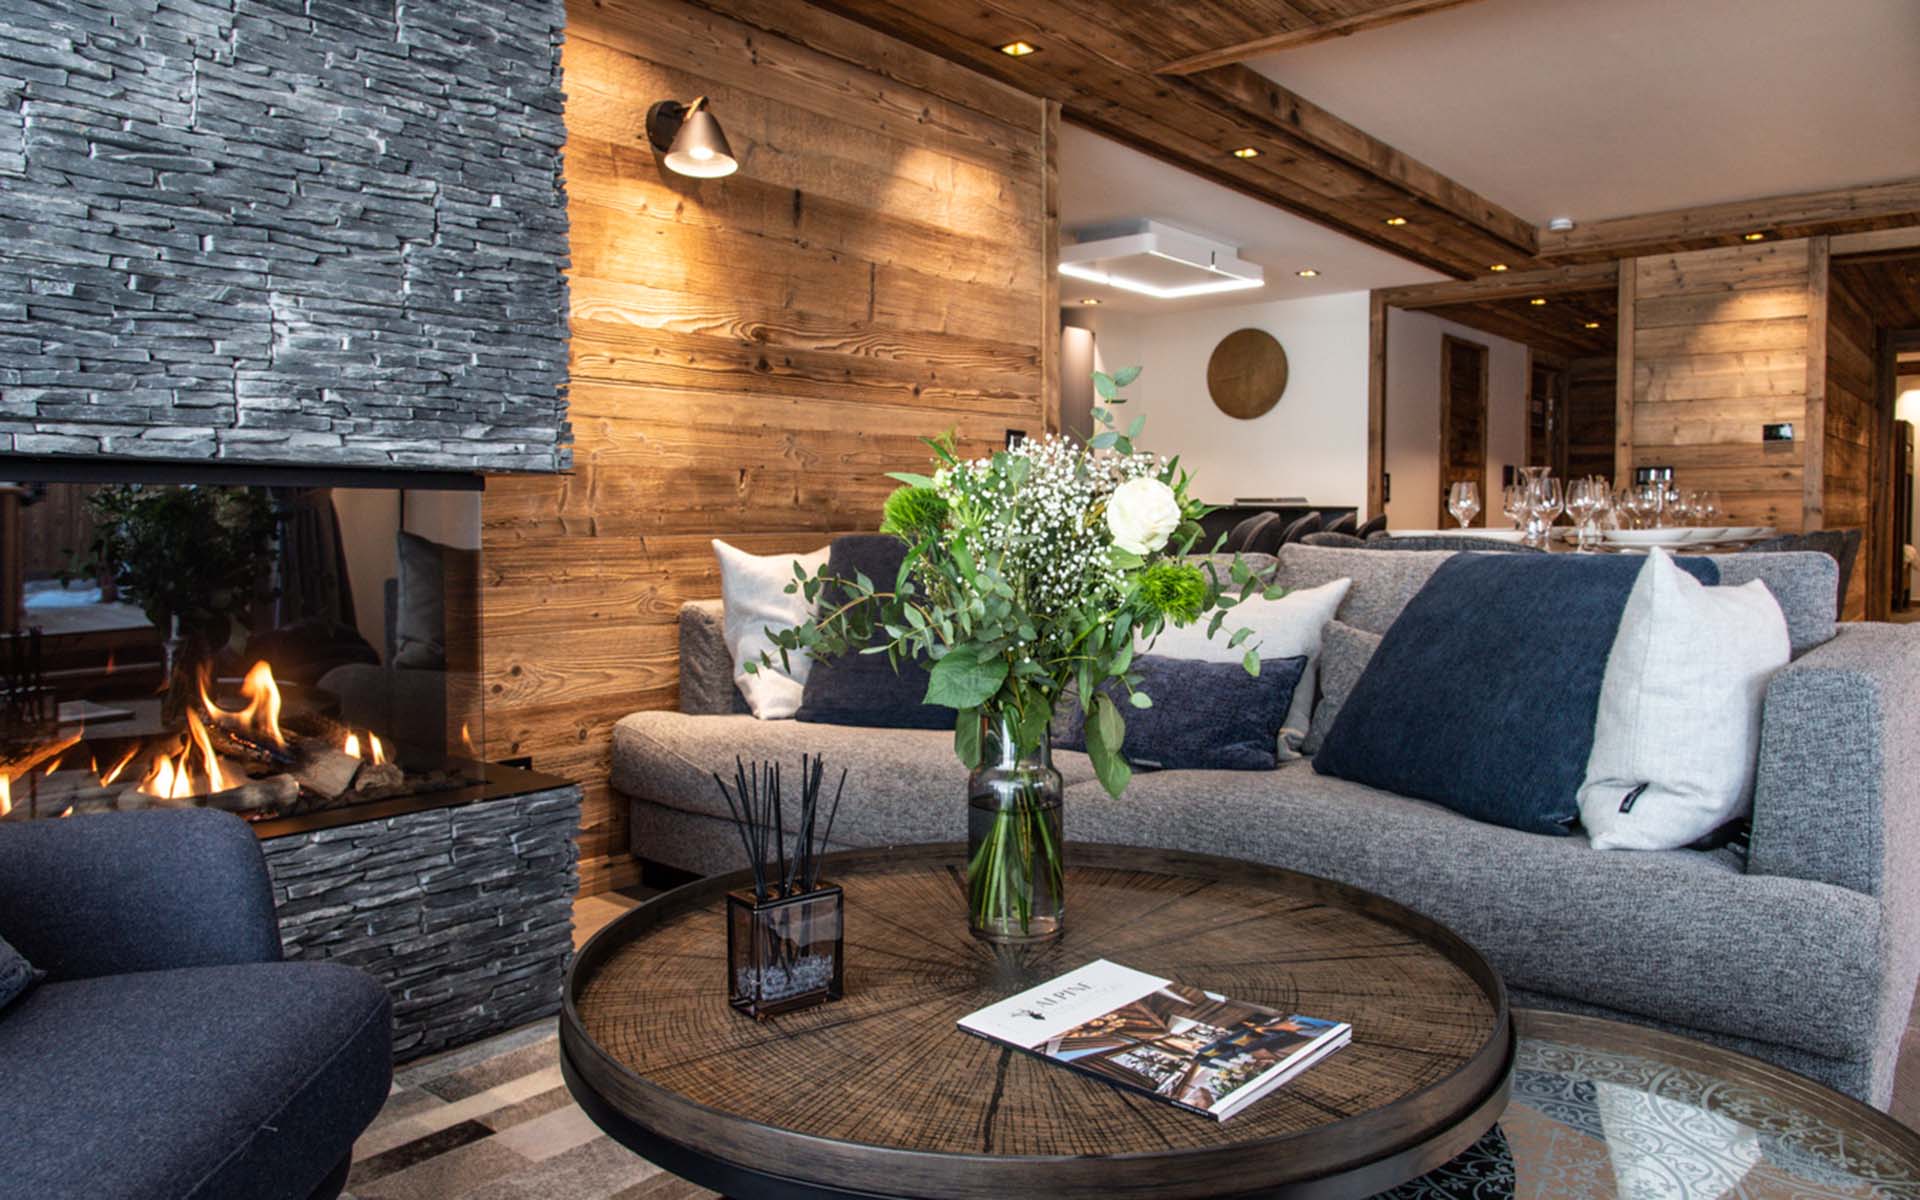 Vail Lodge Apartment A12, Val d’Isere